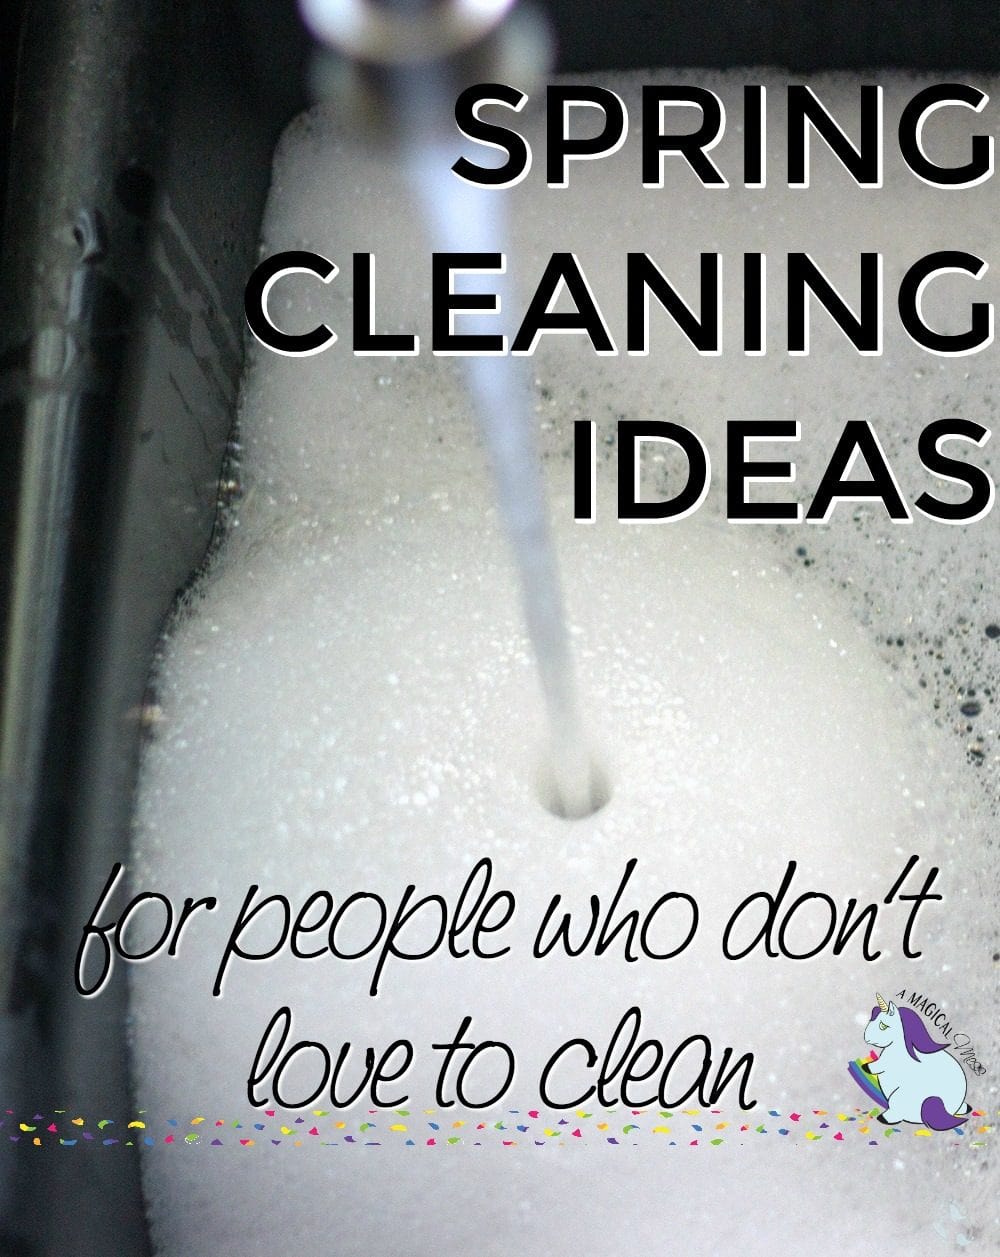 Spring Cleaning Ideas for People who Don't Love to Clean